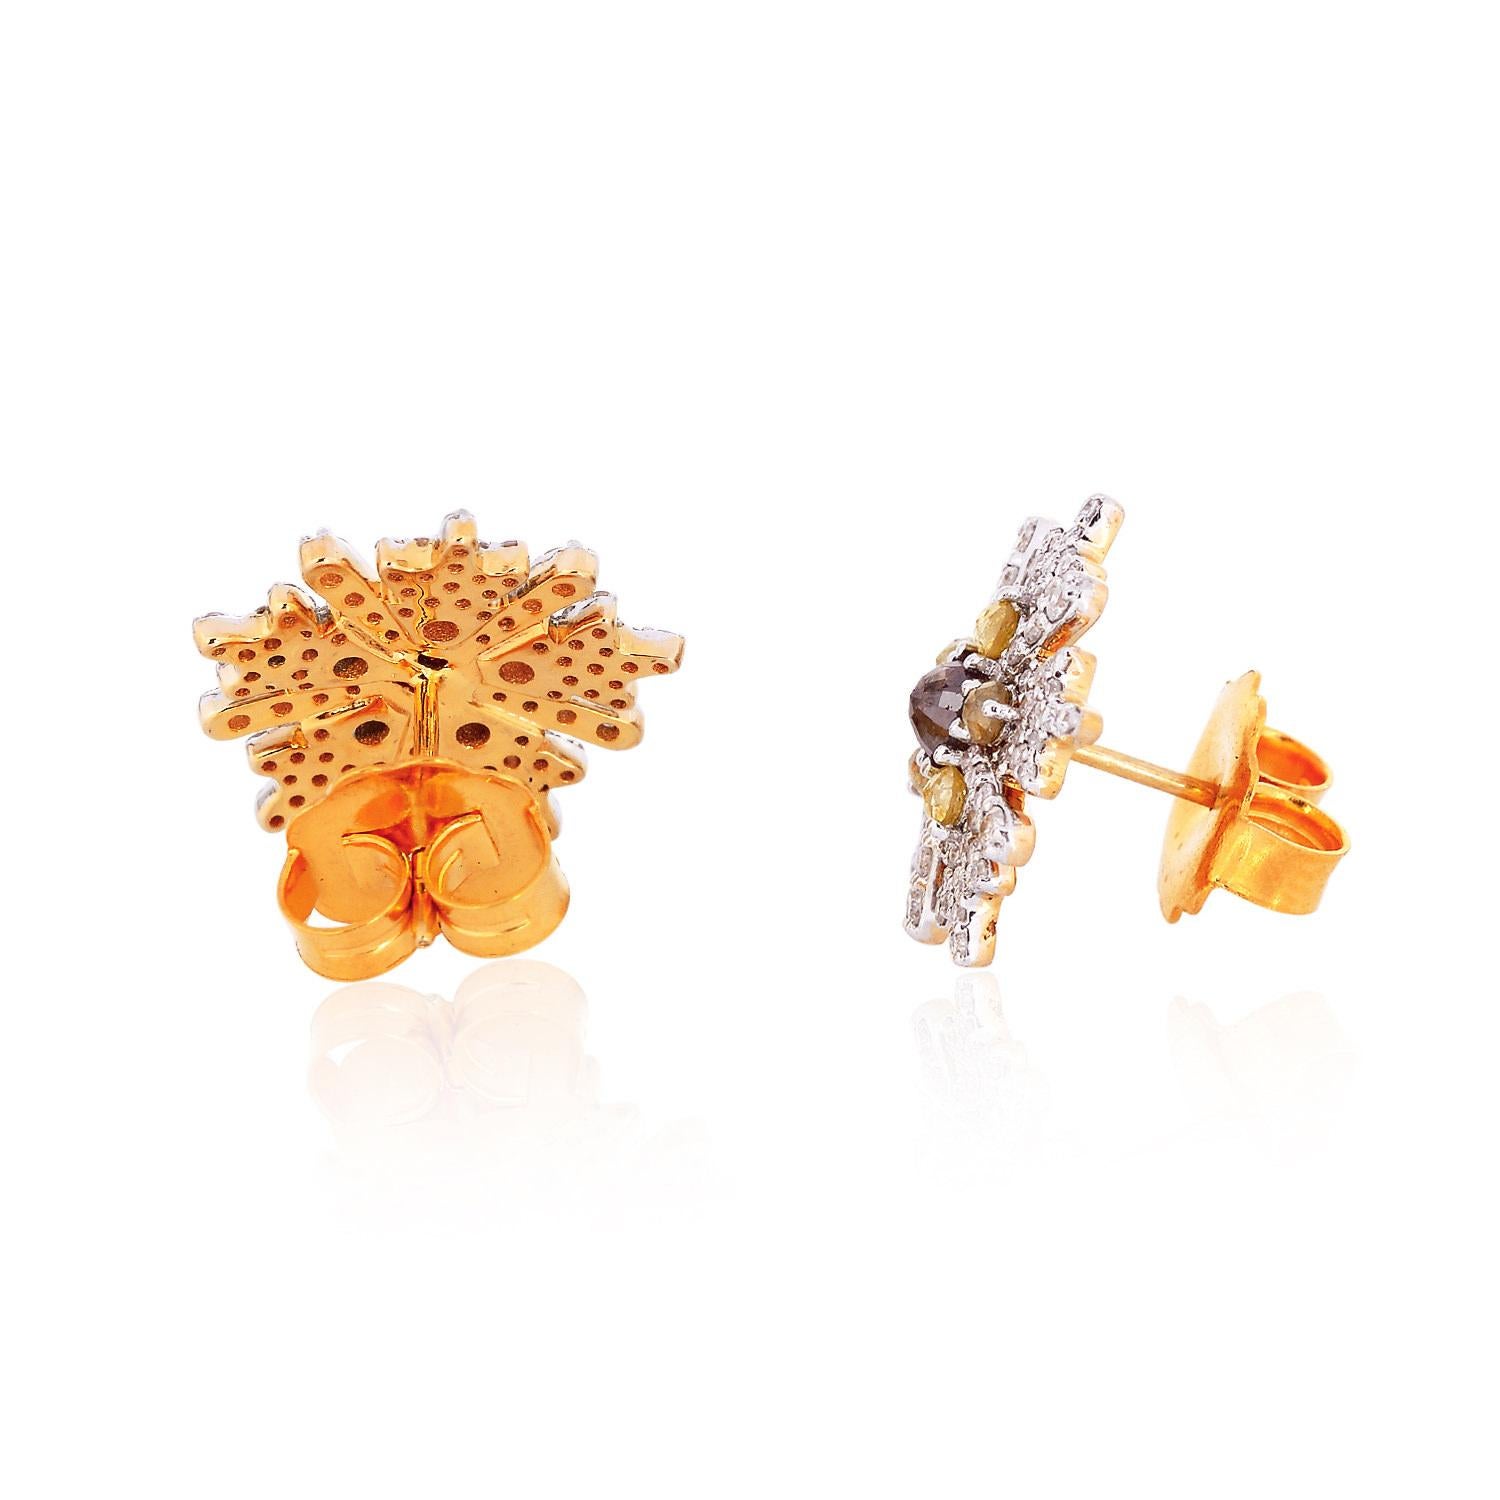 Cast in 18 Karat gold. These beautiful stud earrings features a fancy slice diamond in center and set in 2.05 carats of sparkling diamonds. 

FOLLOW  MEGHNA JEWELS storefront to view the latest collection & exclusive pieces.  Meghna Jewels is